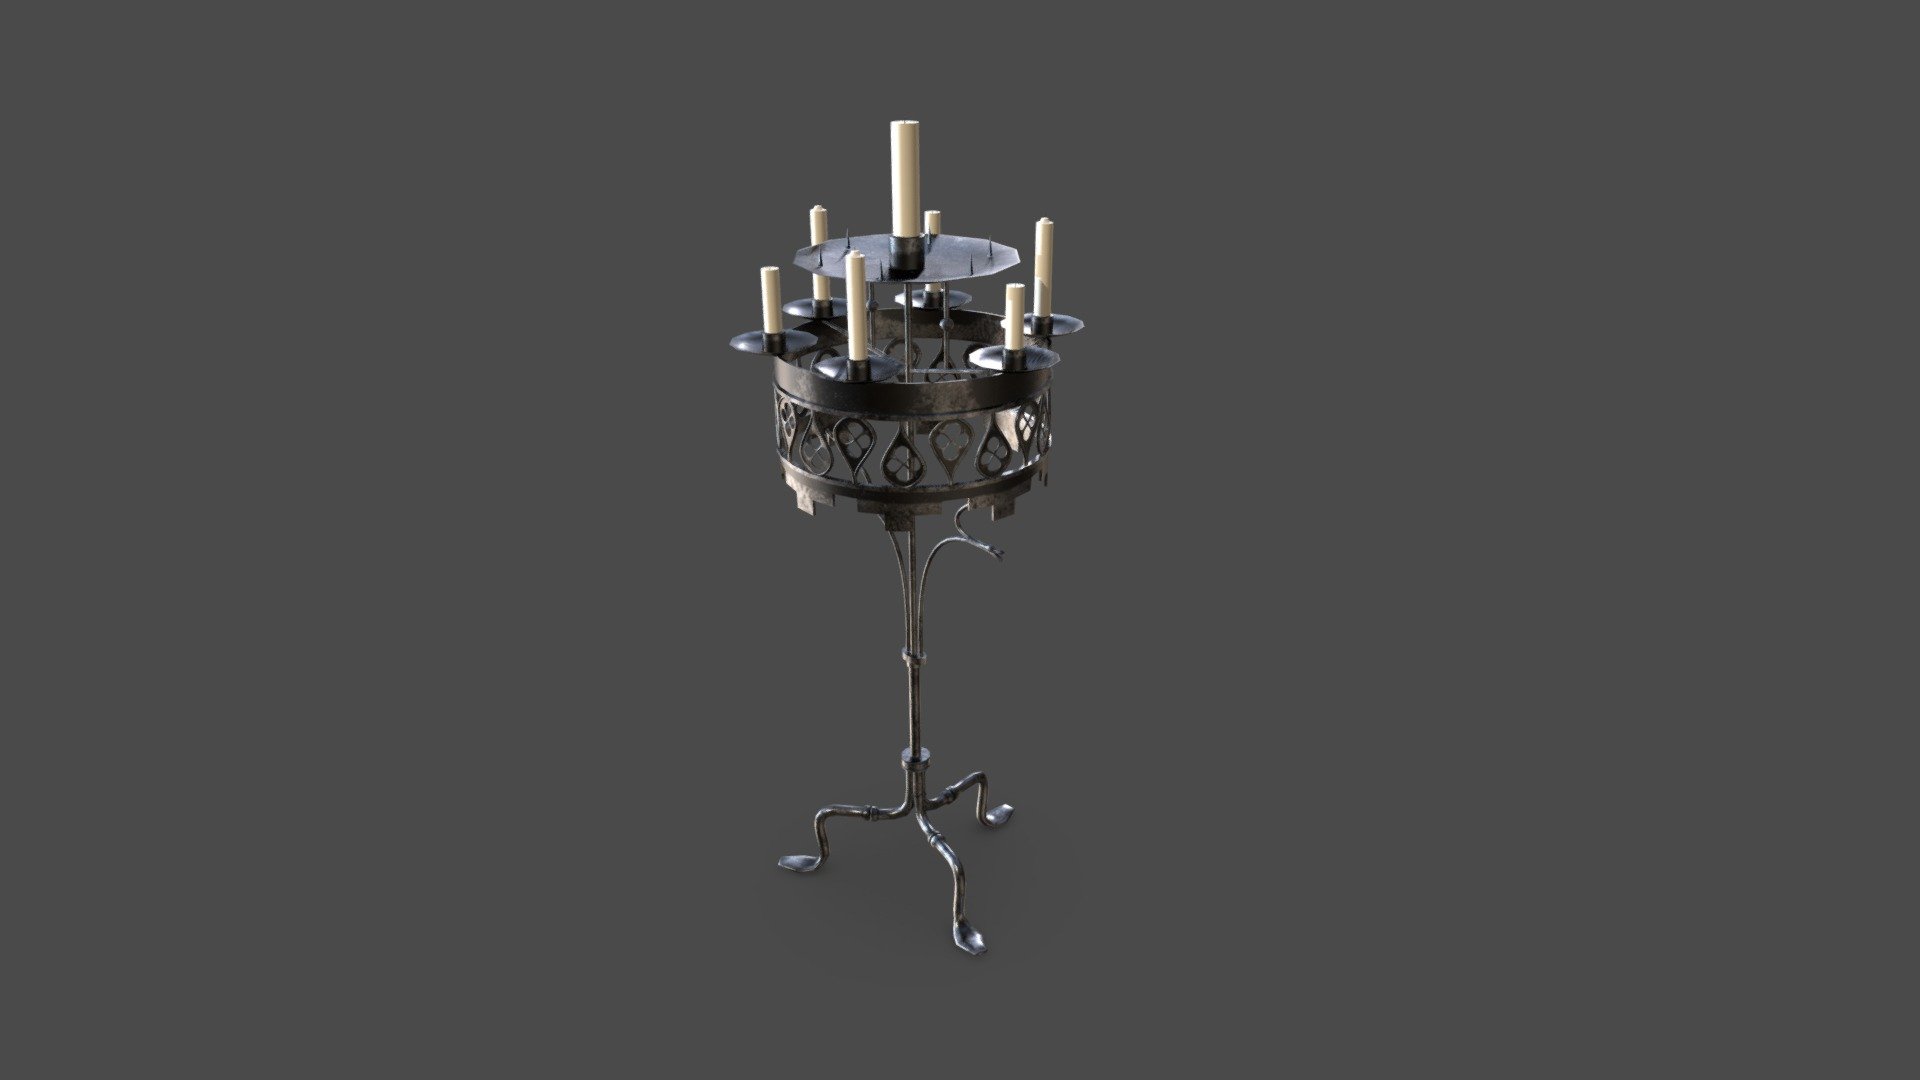 Medieval Candle Holder




Model is low poly.

Model is Game-Ready/VR ready.

Model is UV mapped and unwrapped (non overlapping)

Asset is fully textured, 2048x2048 .png’s. PBR

Model is ready for Unity and Unreal game engines.

File Format: .FBX

Additional zip file contains all the files 3d model